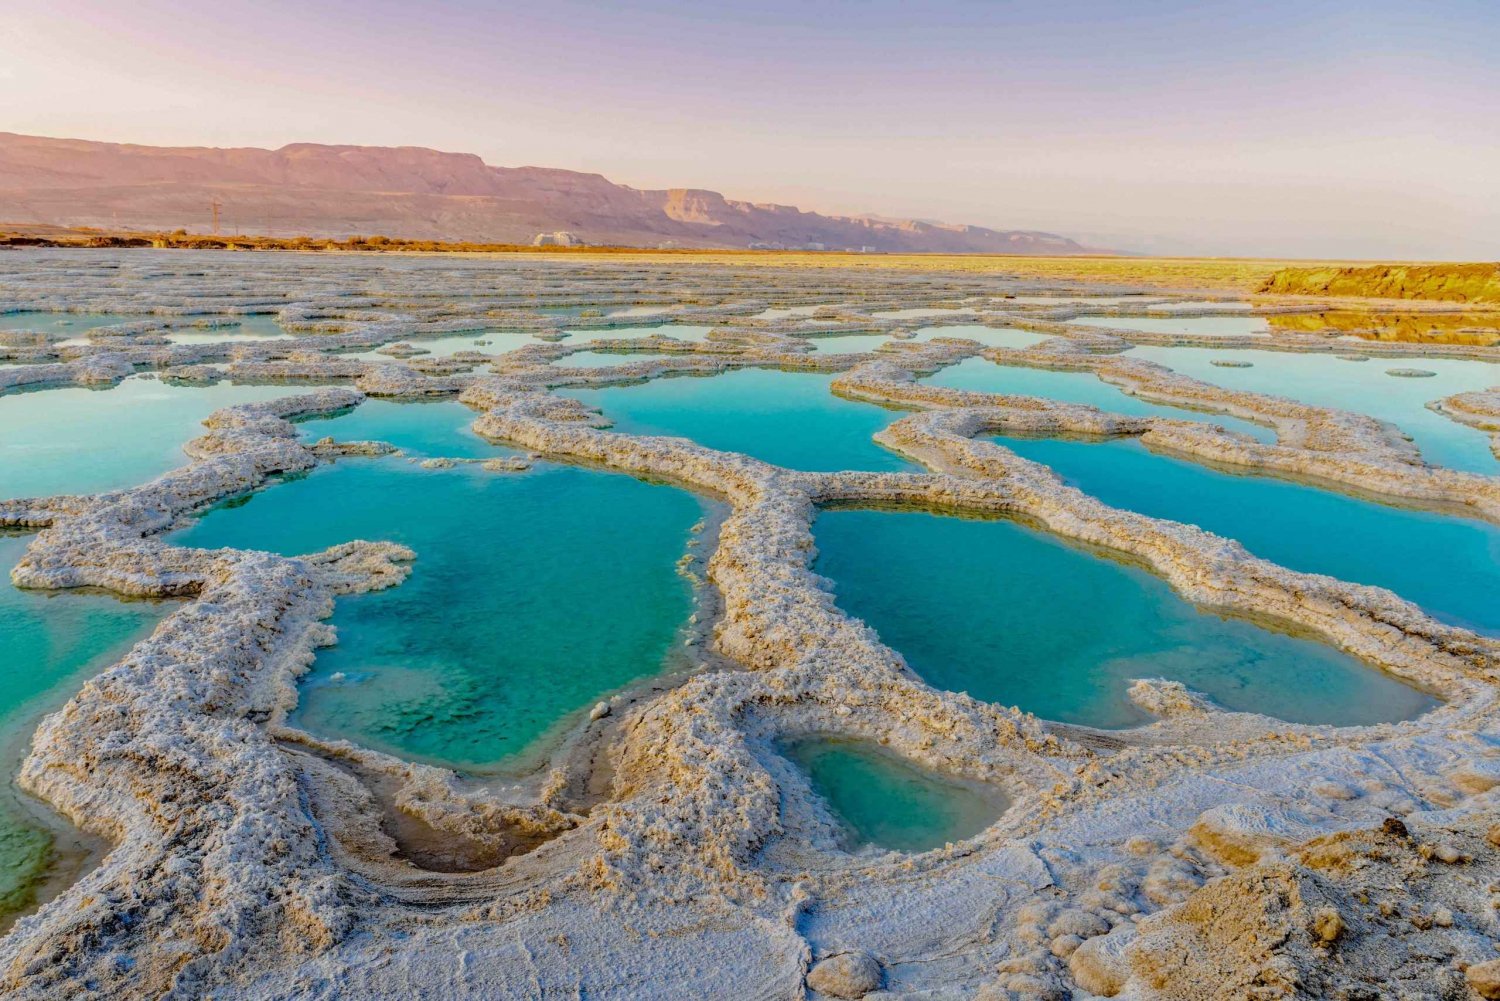 One Day Dead Sea Tour from Tel Aviv